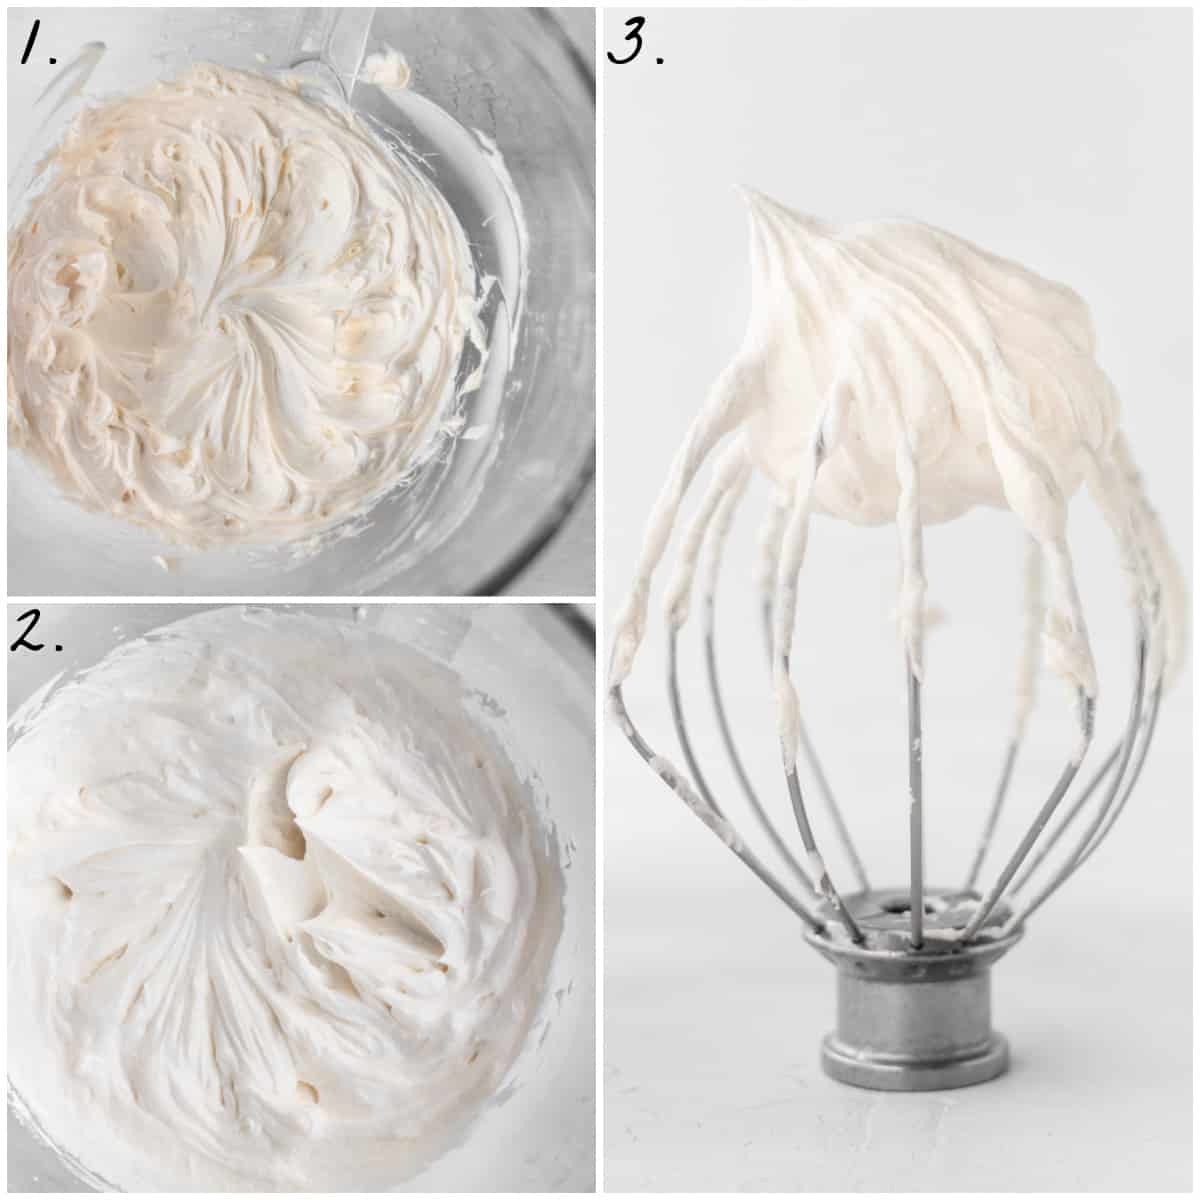 3 process photos of making frosting in a stand mixer. 